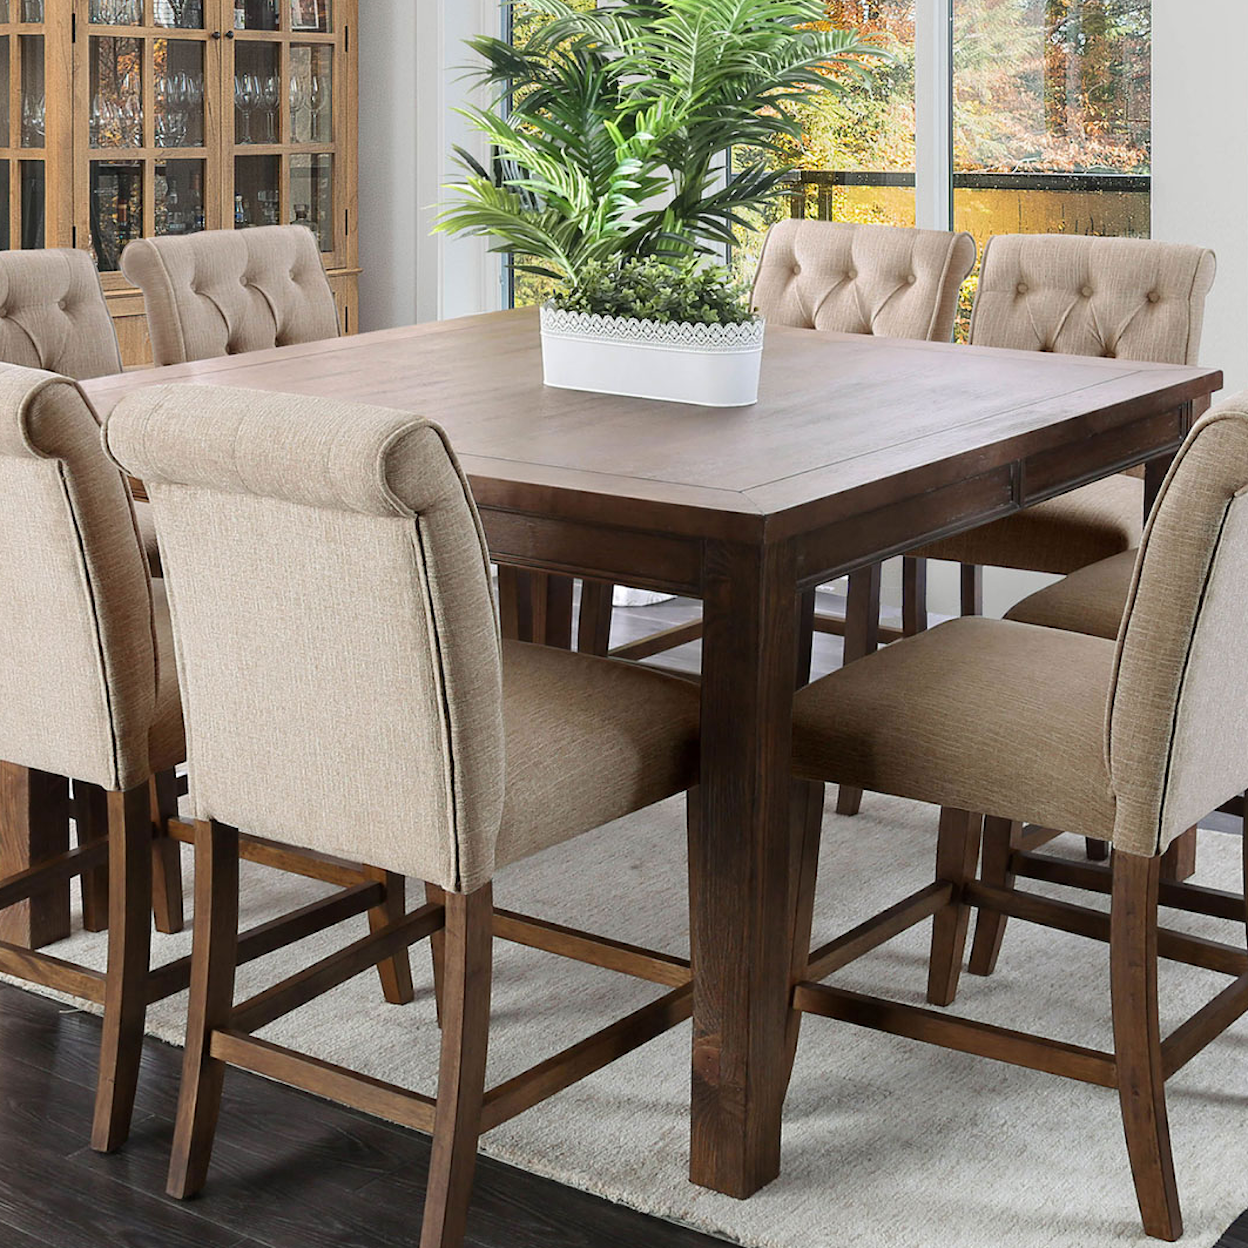 Furniture of America Sania III Counter Height Dining Table